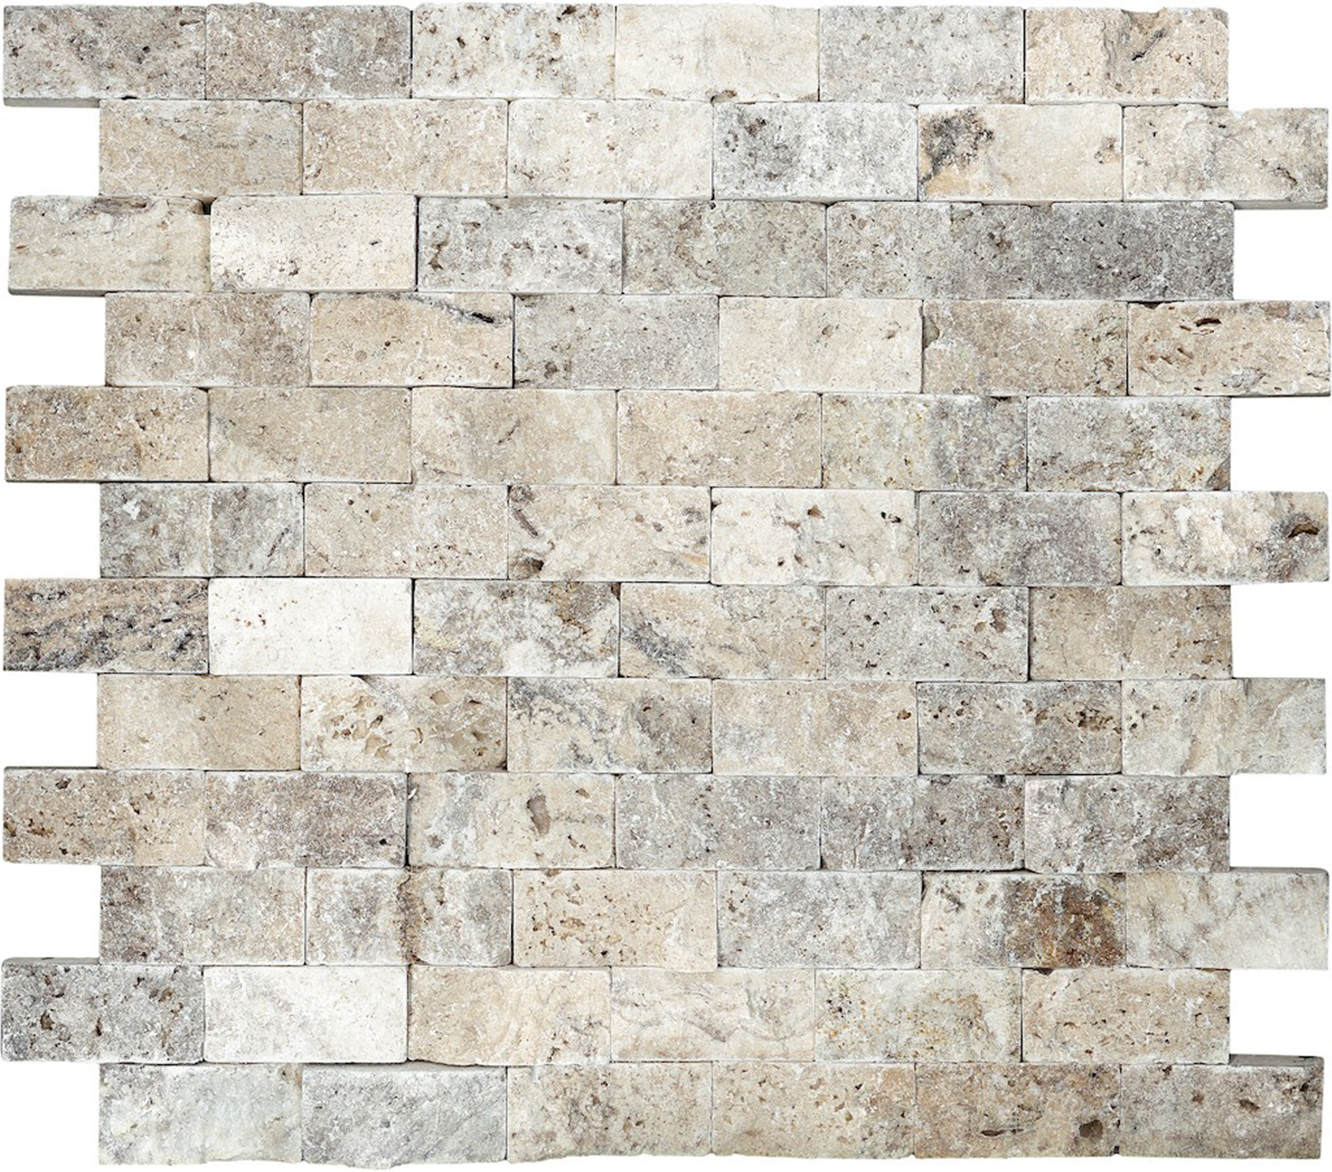 travertine brick offset 1x2-inch pattern natural stone mosaic from picasso anatolia collection distributed by surface group international split face finish straight edge edge mesh shape